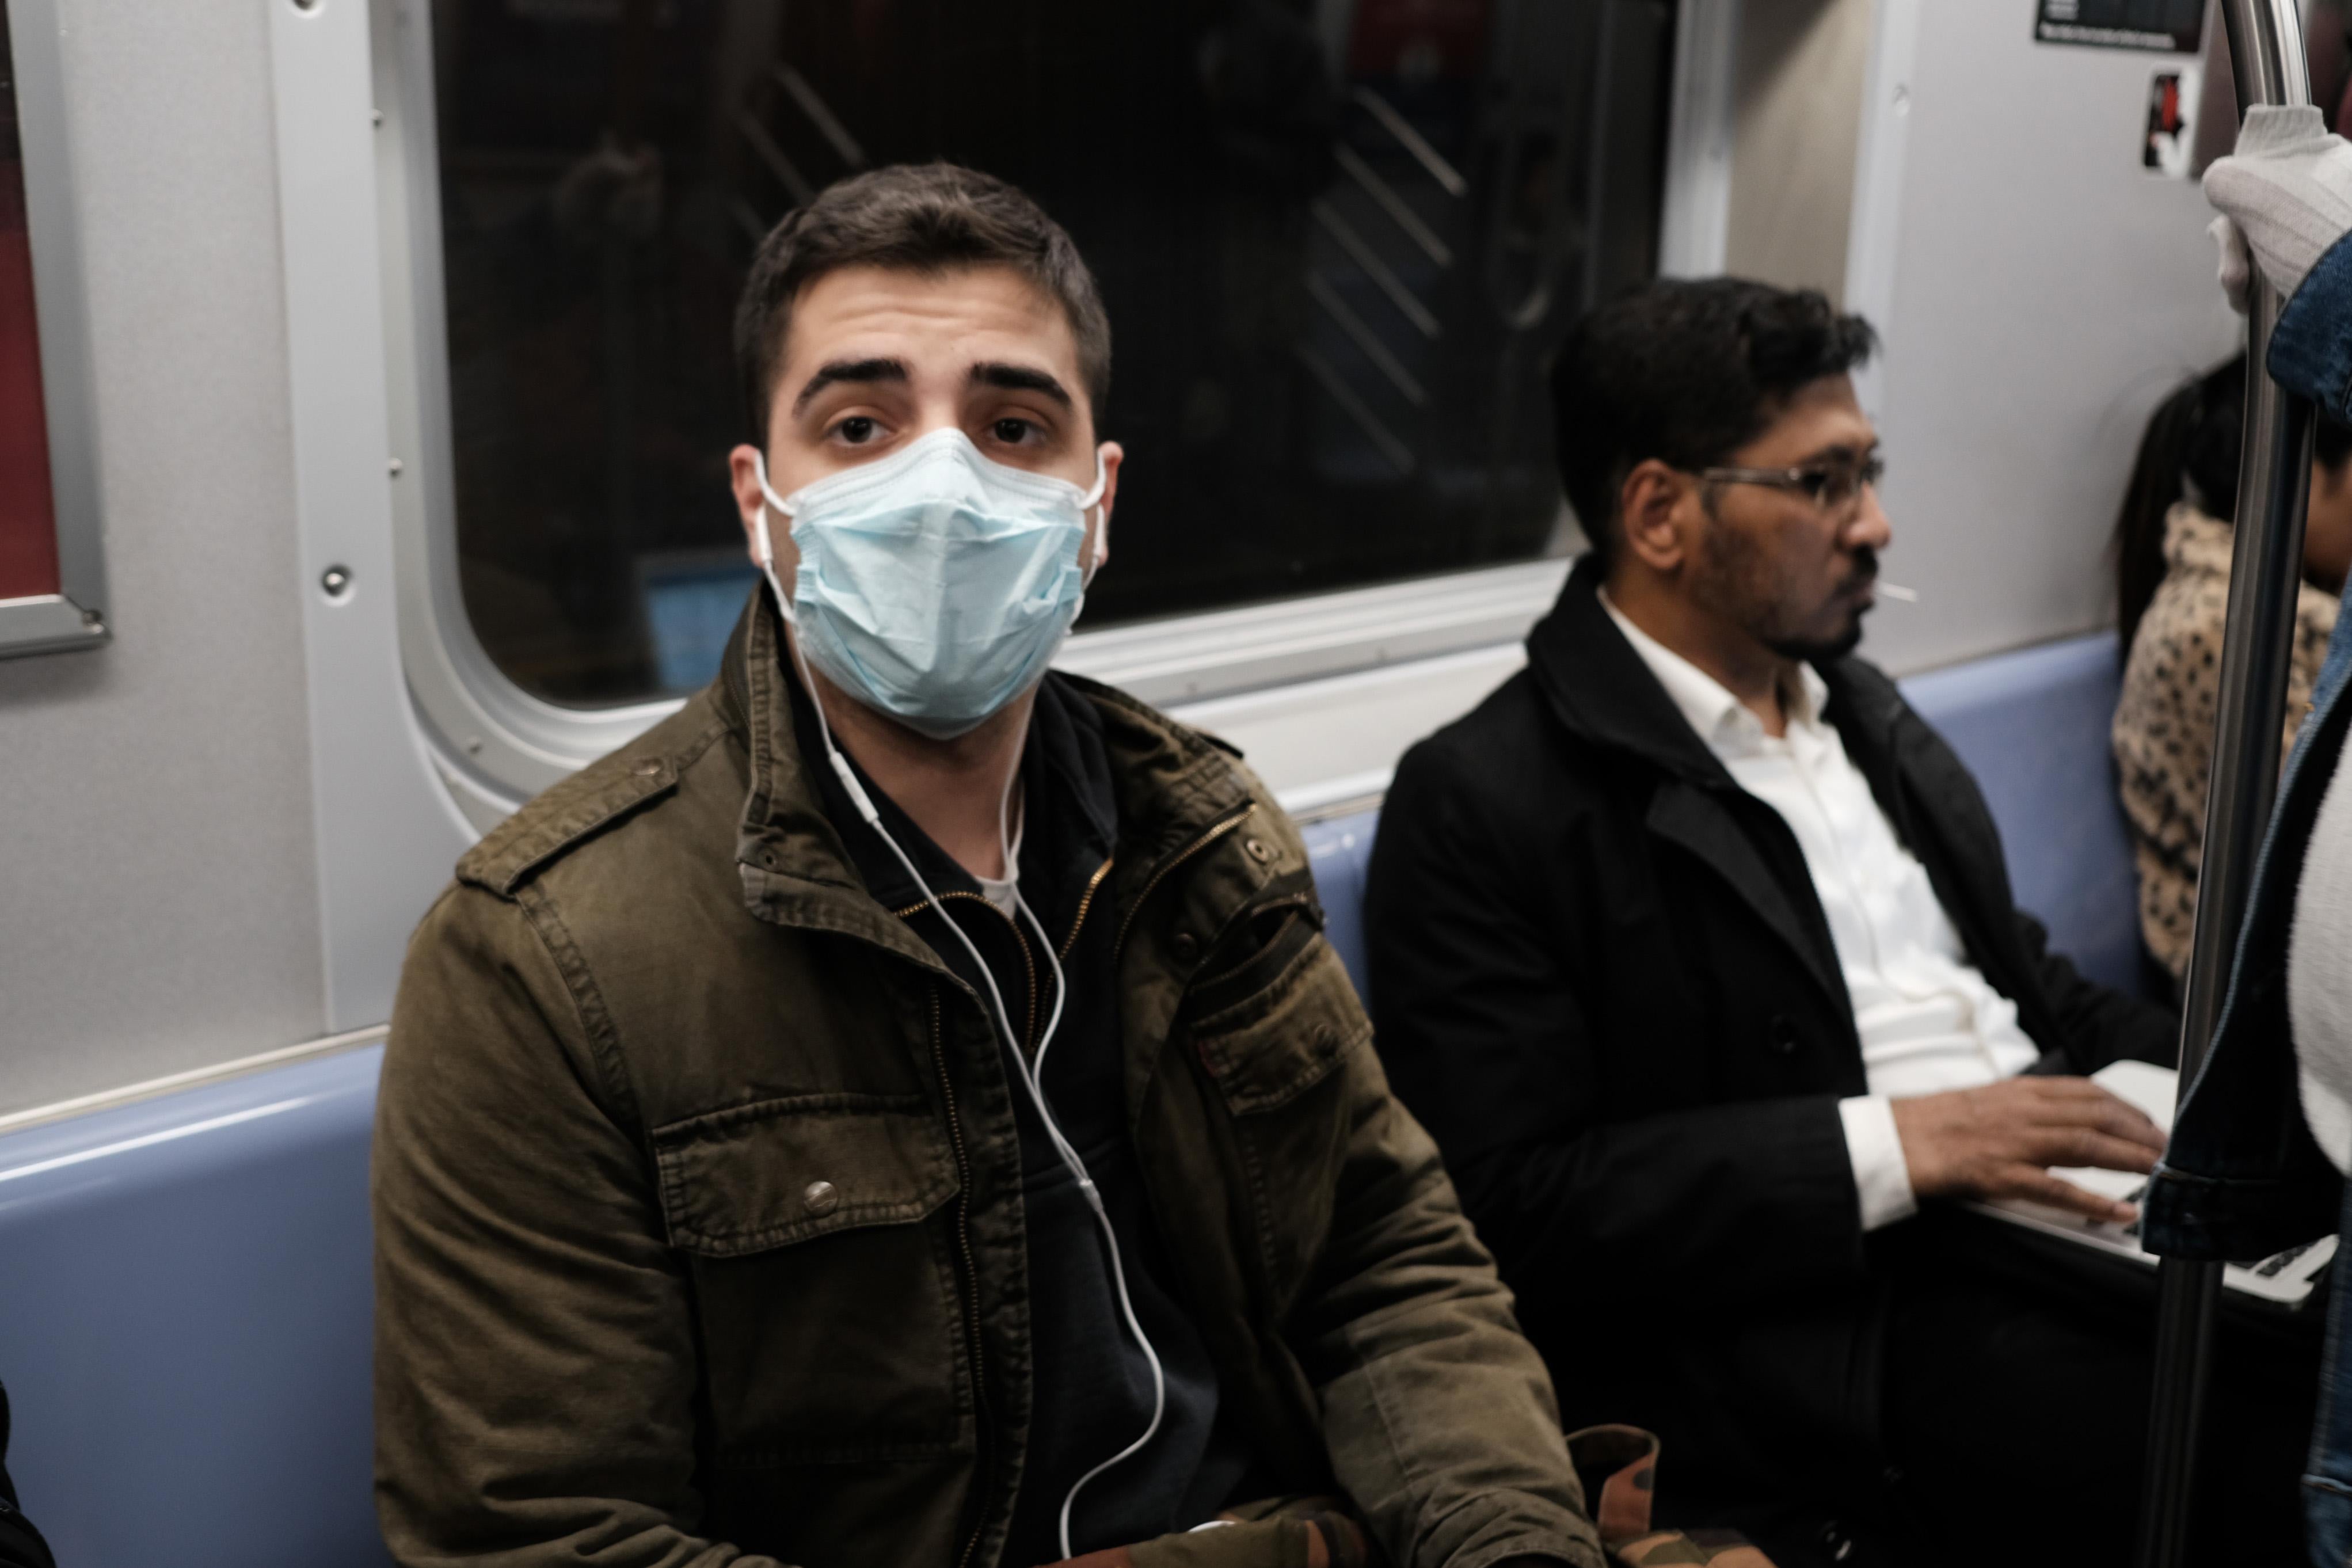 A man wearing a face mask on the subway.